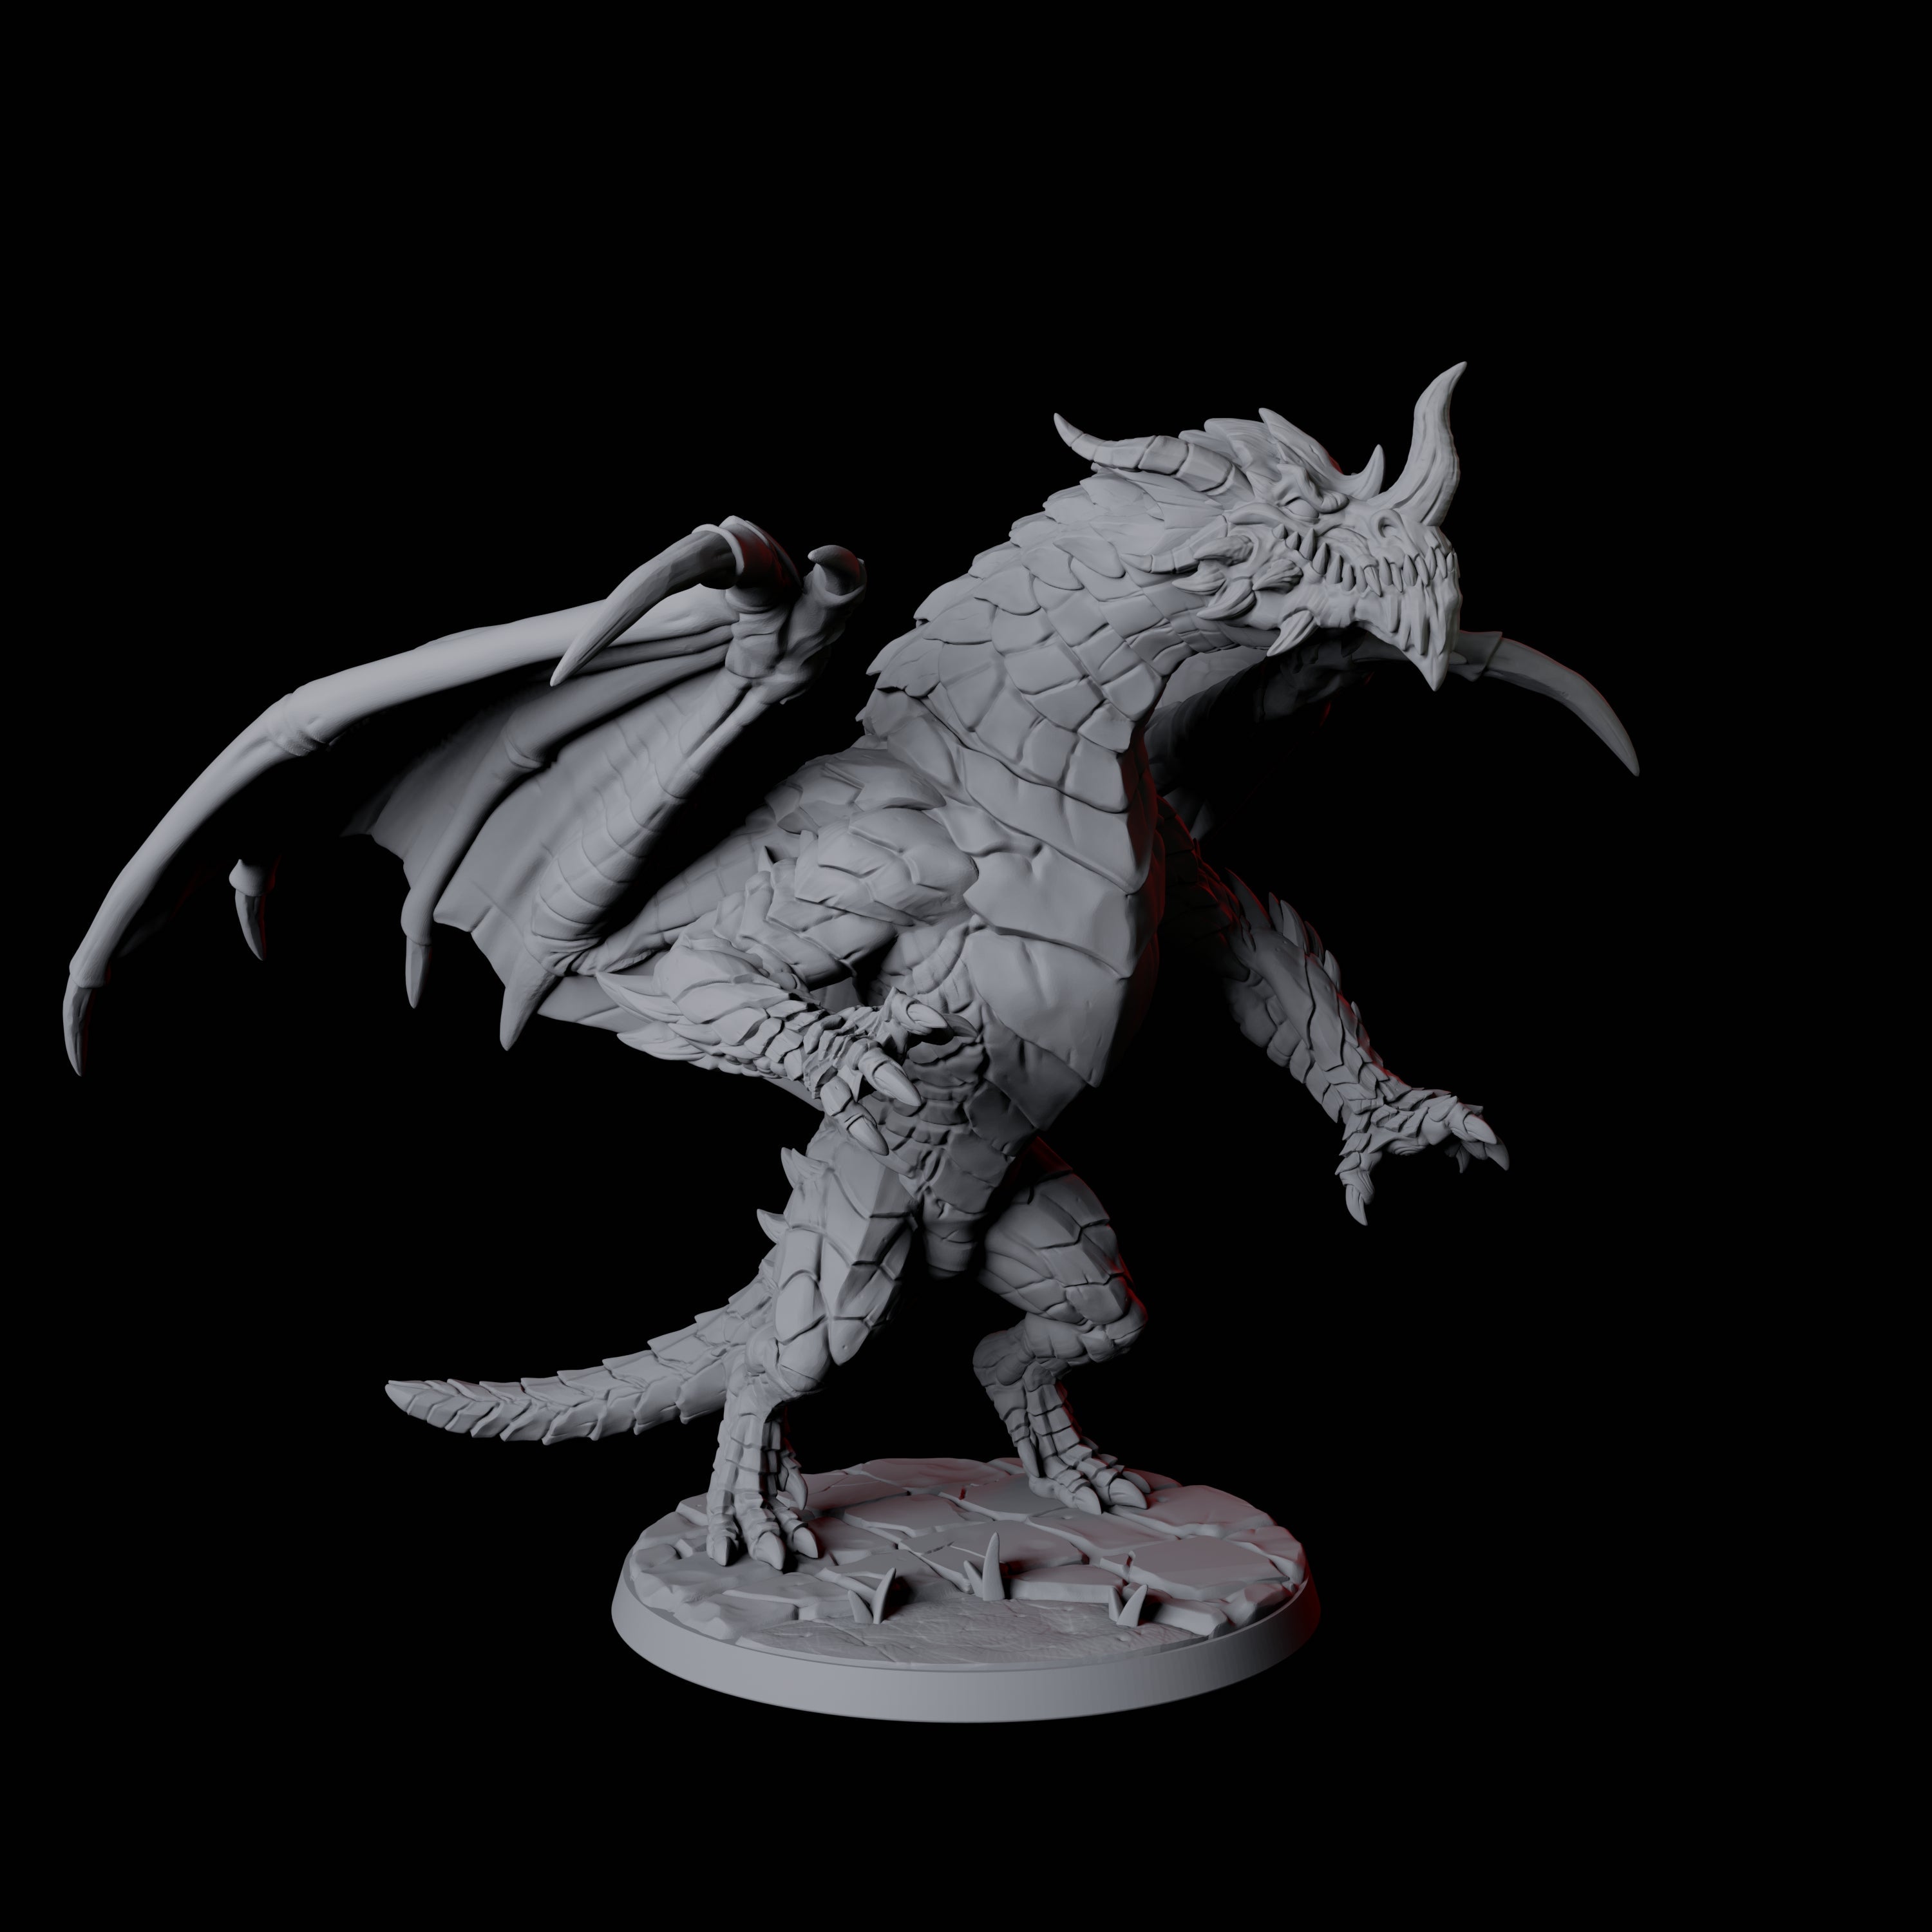 Chromatic Dragon D Miniature for Dungeons and Dragons, Pathfinder or other TTRPGs